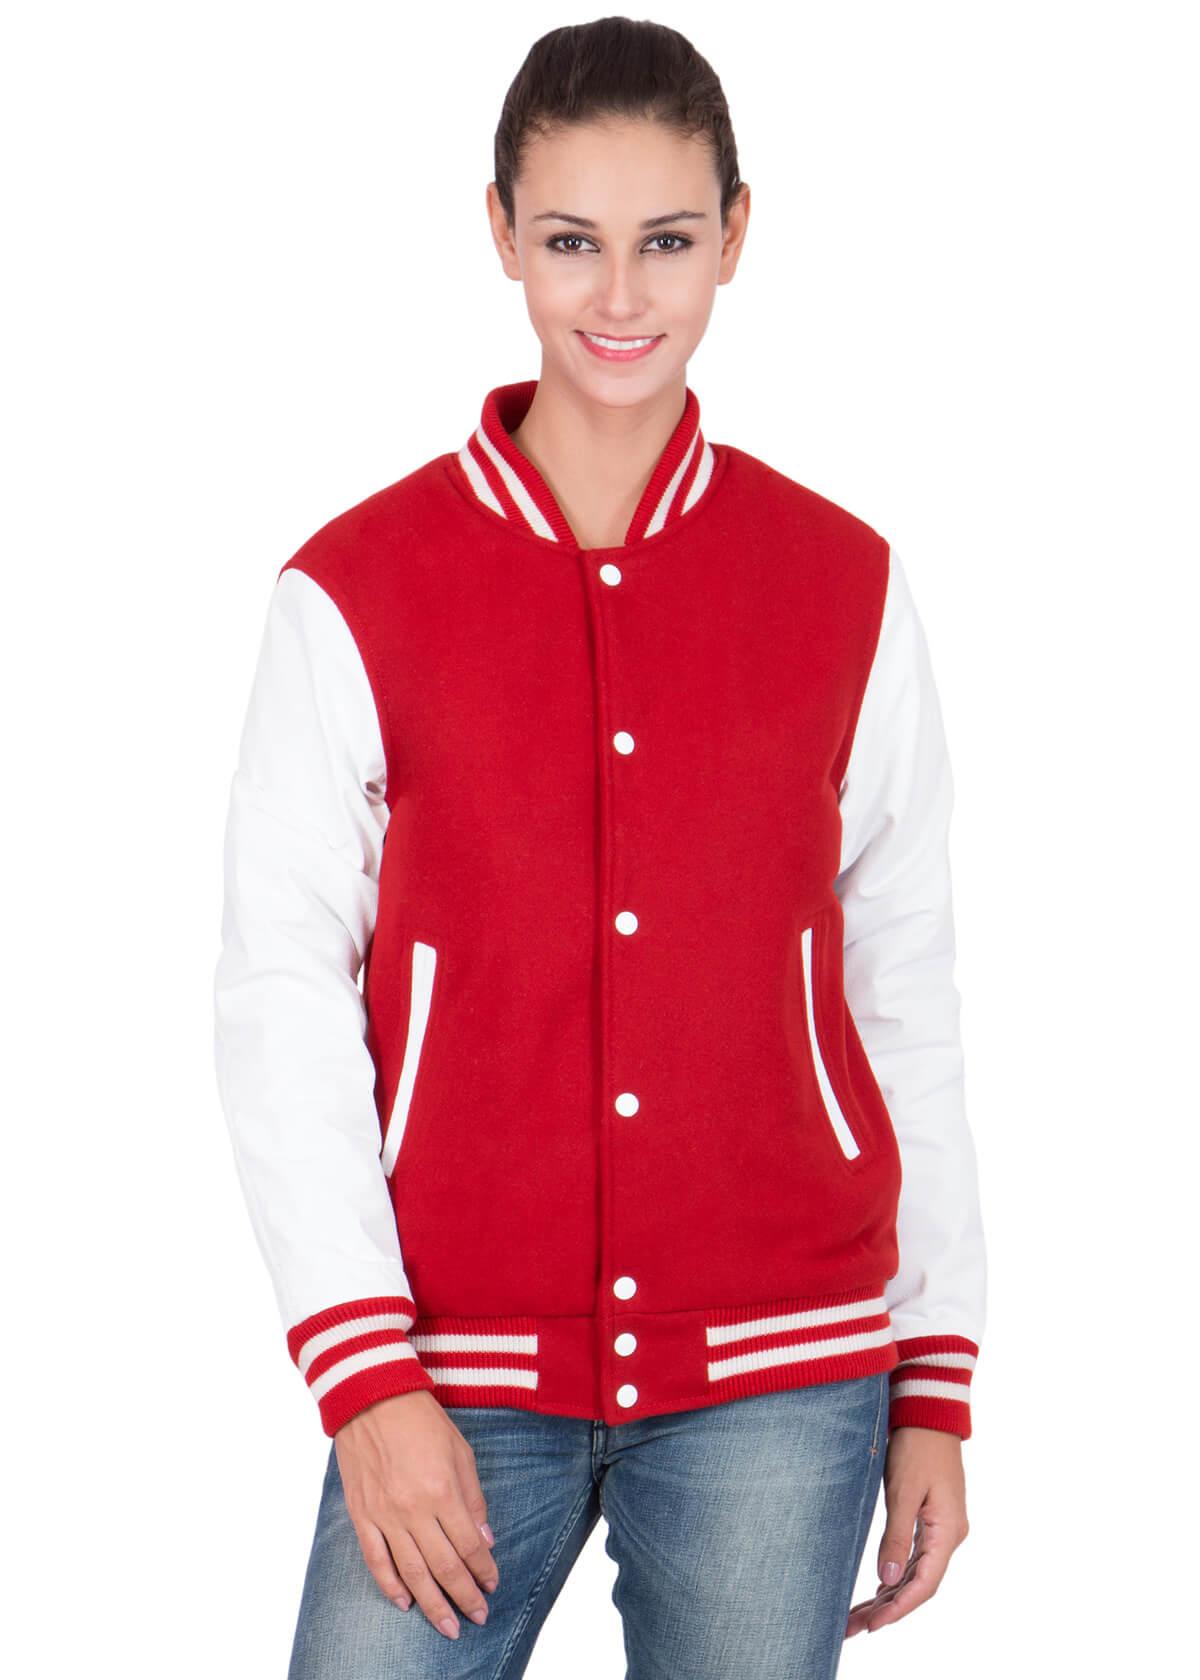 Womens Scarlet Red Varsity Jacket with White Leather Sleeves-2